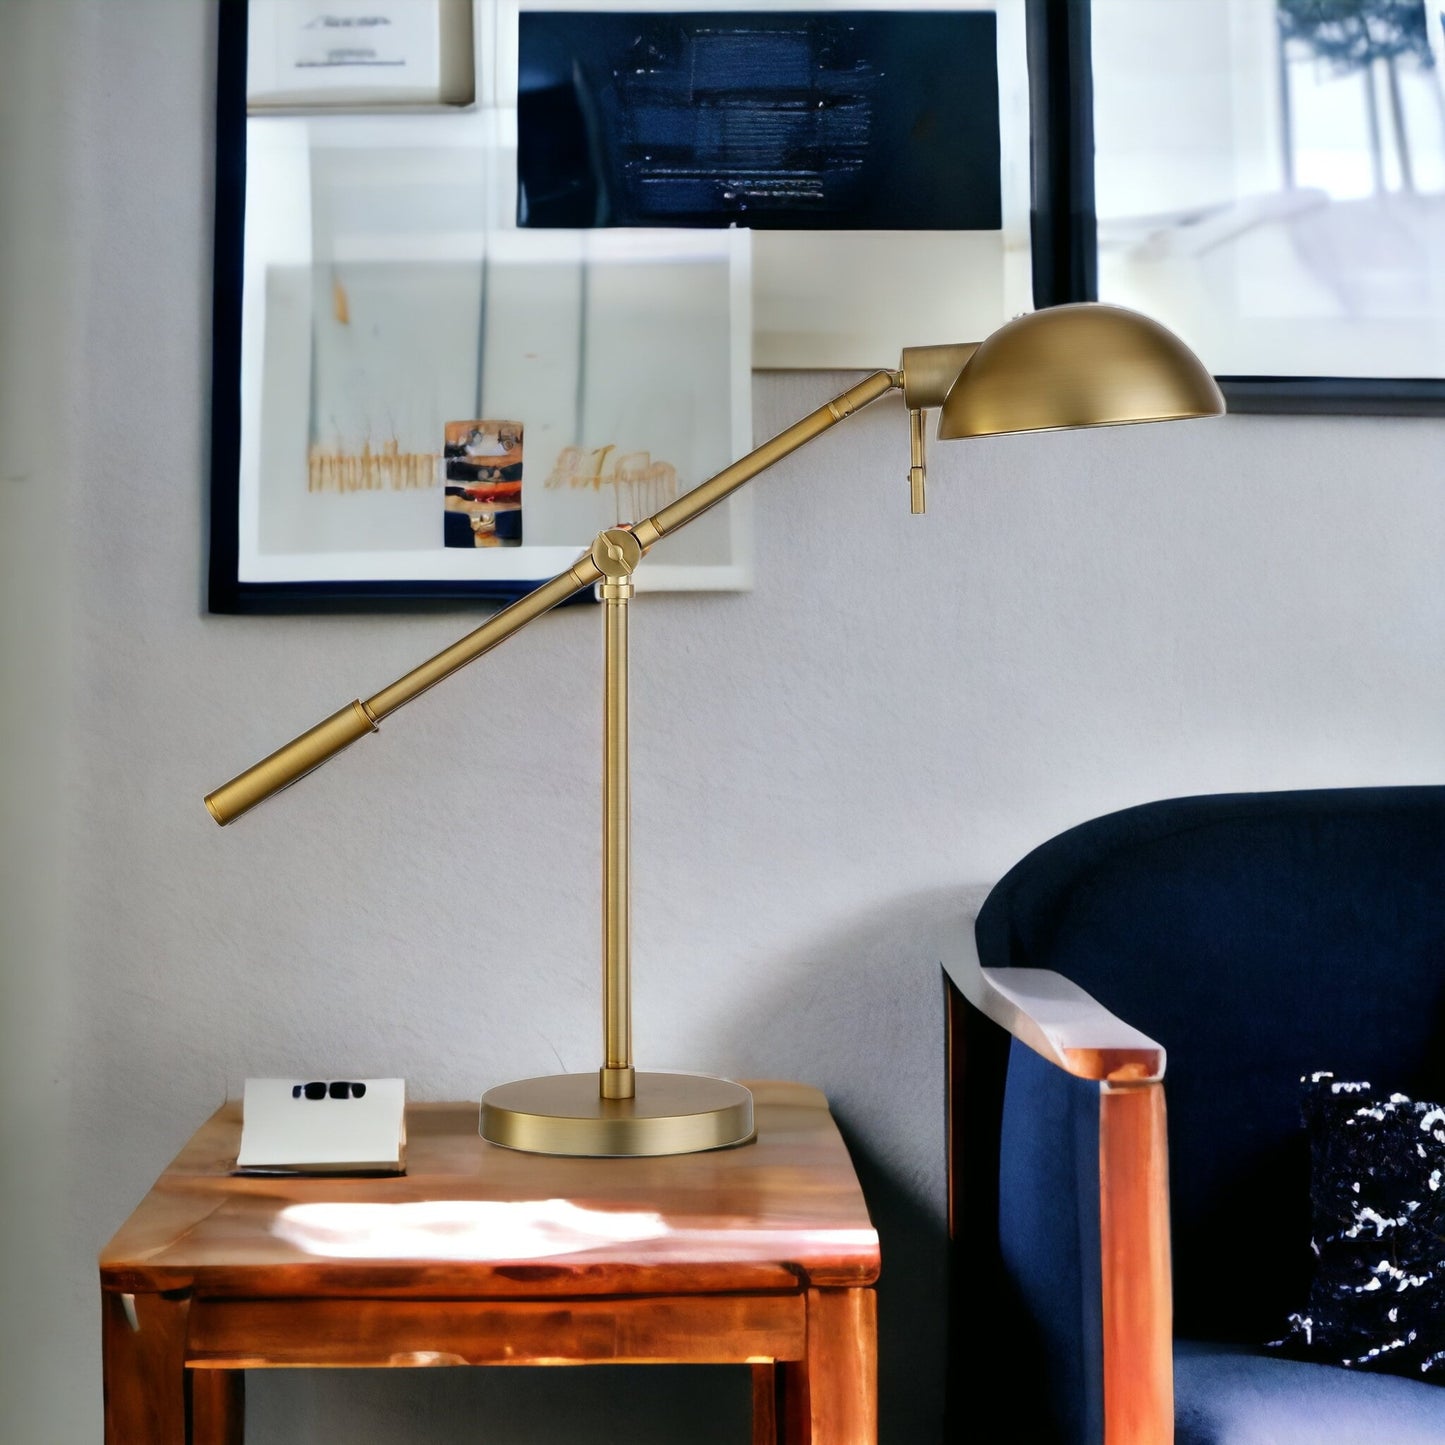 23" Brass Metal Desk Table Lamp With Brass Dome Shade